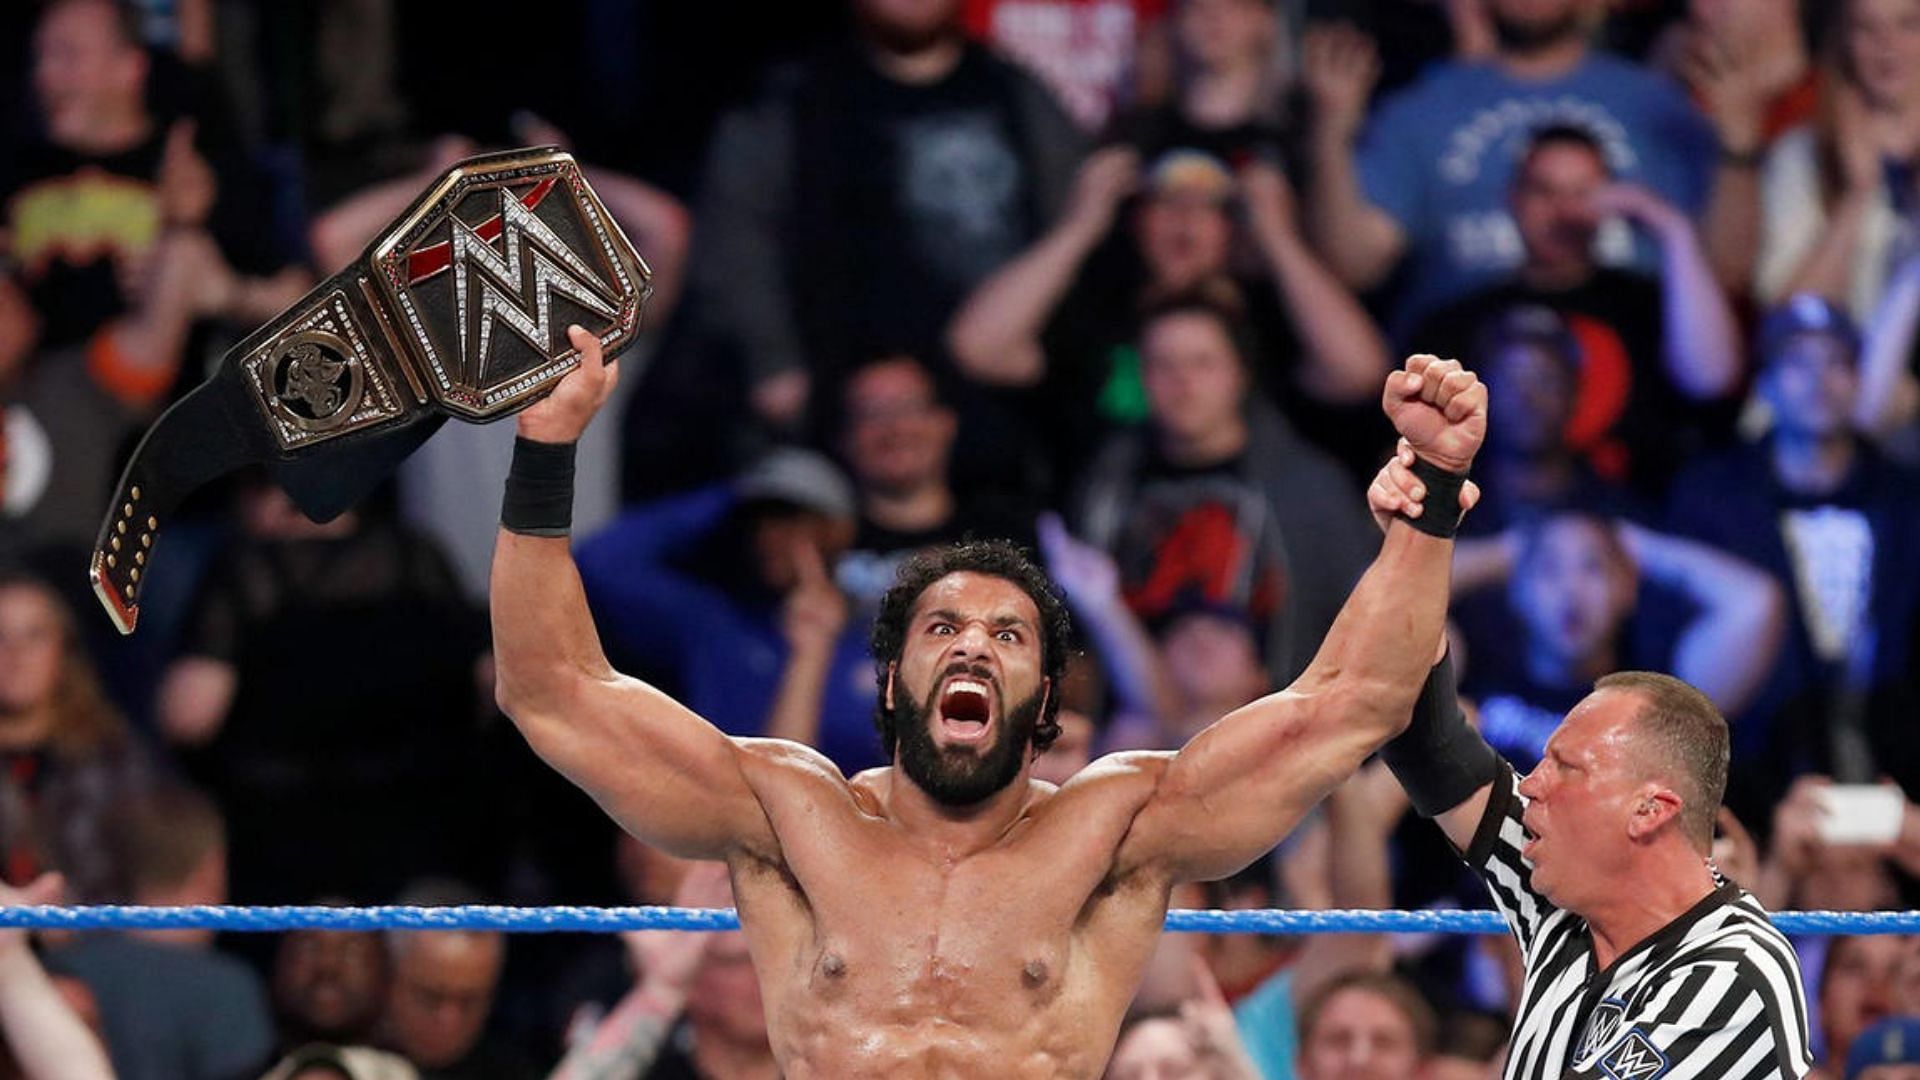 Jinder Mahal is a former WWE Champion!